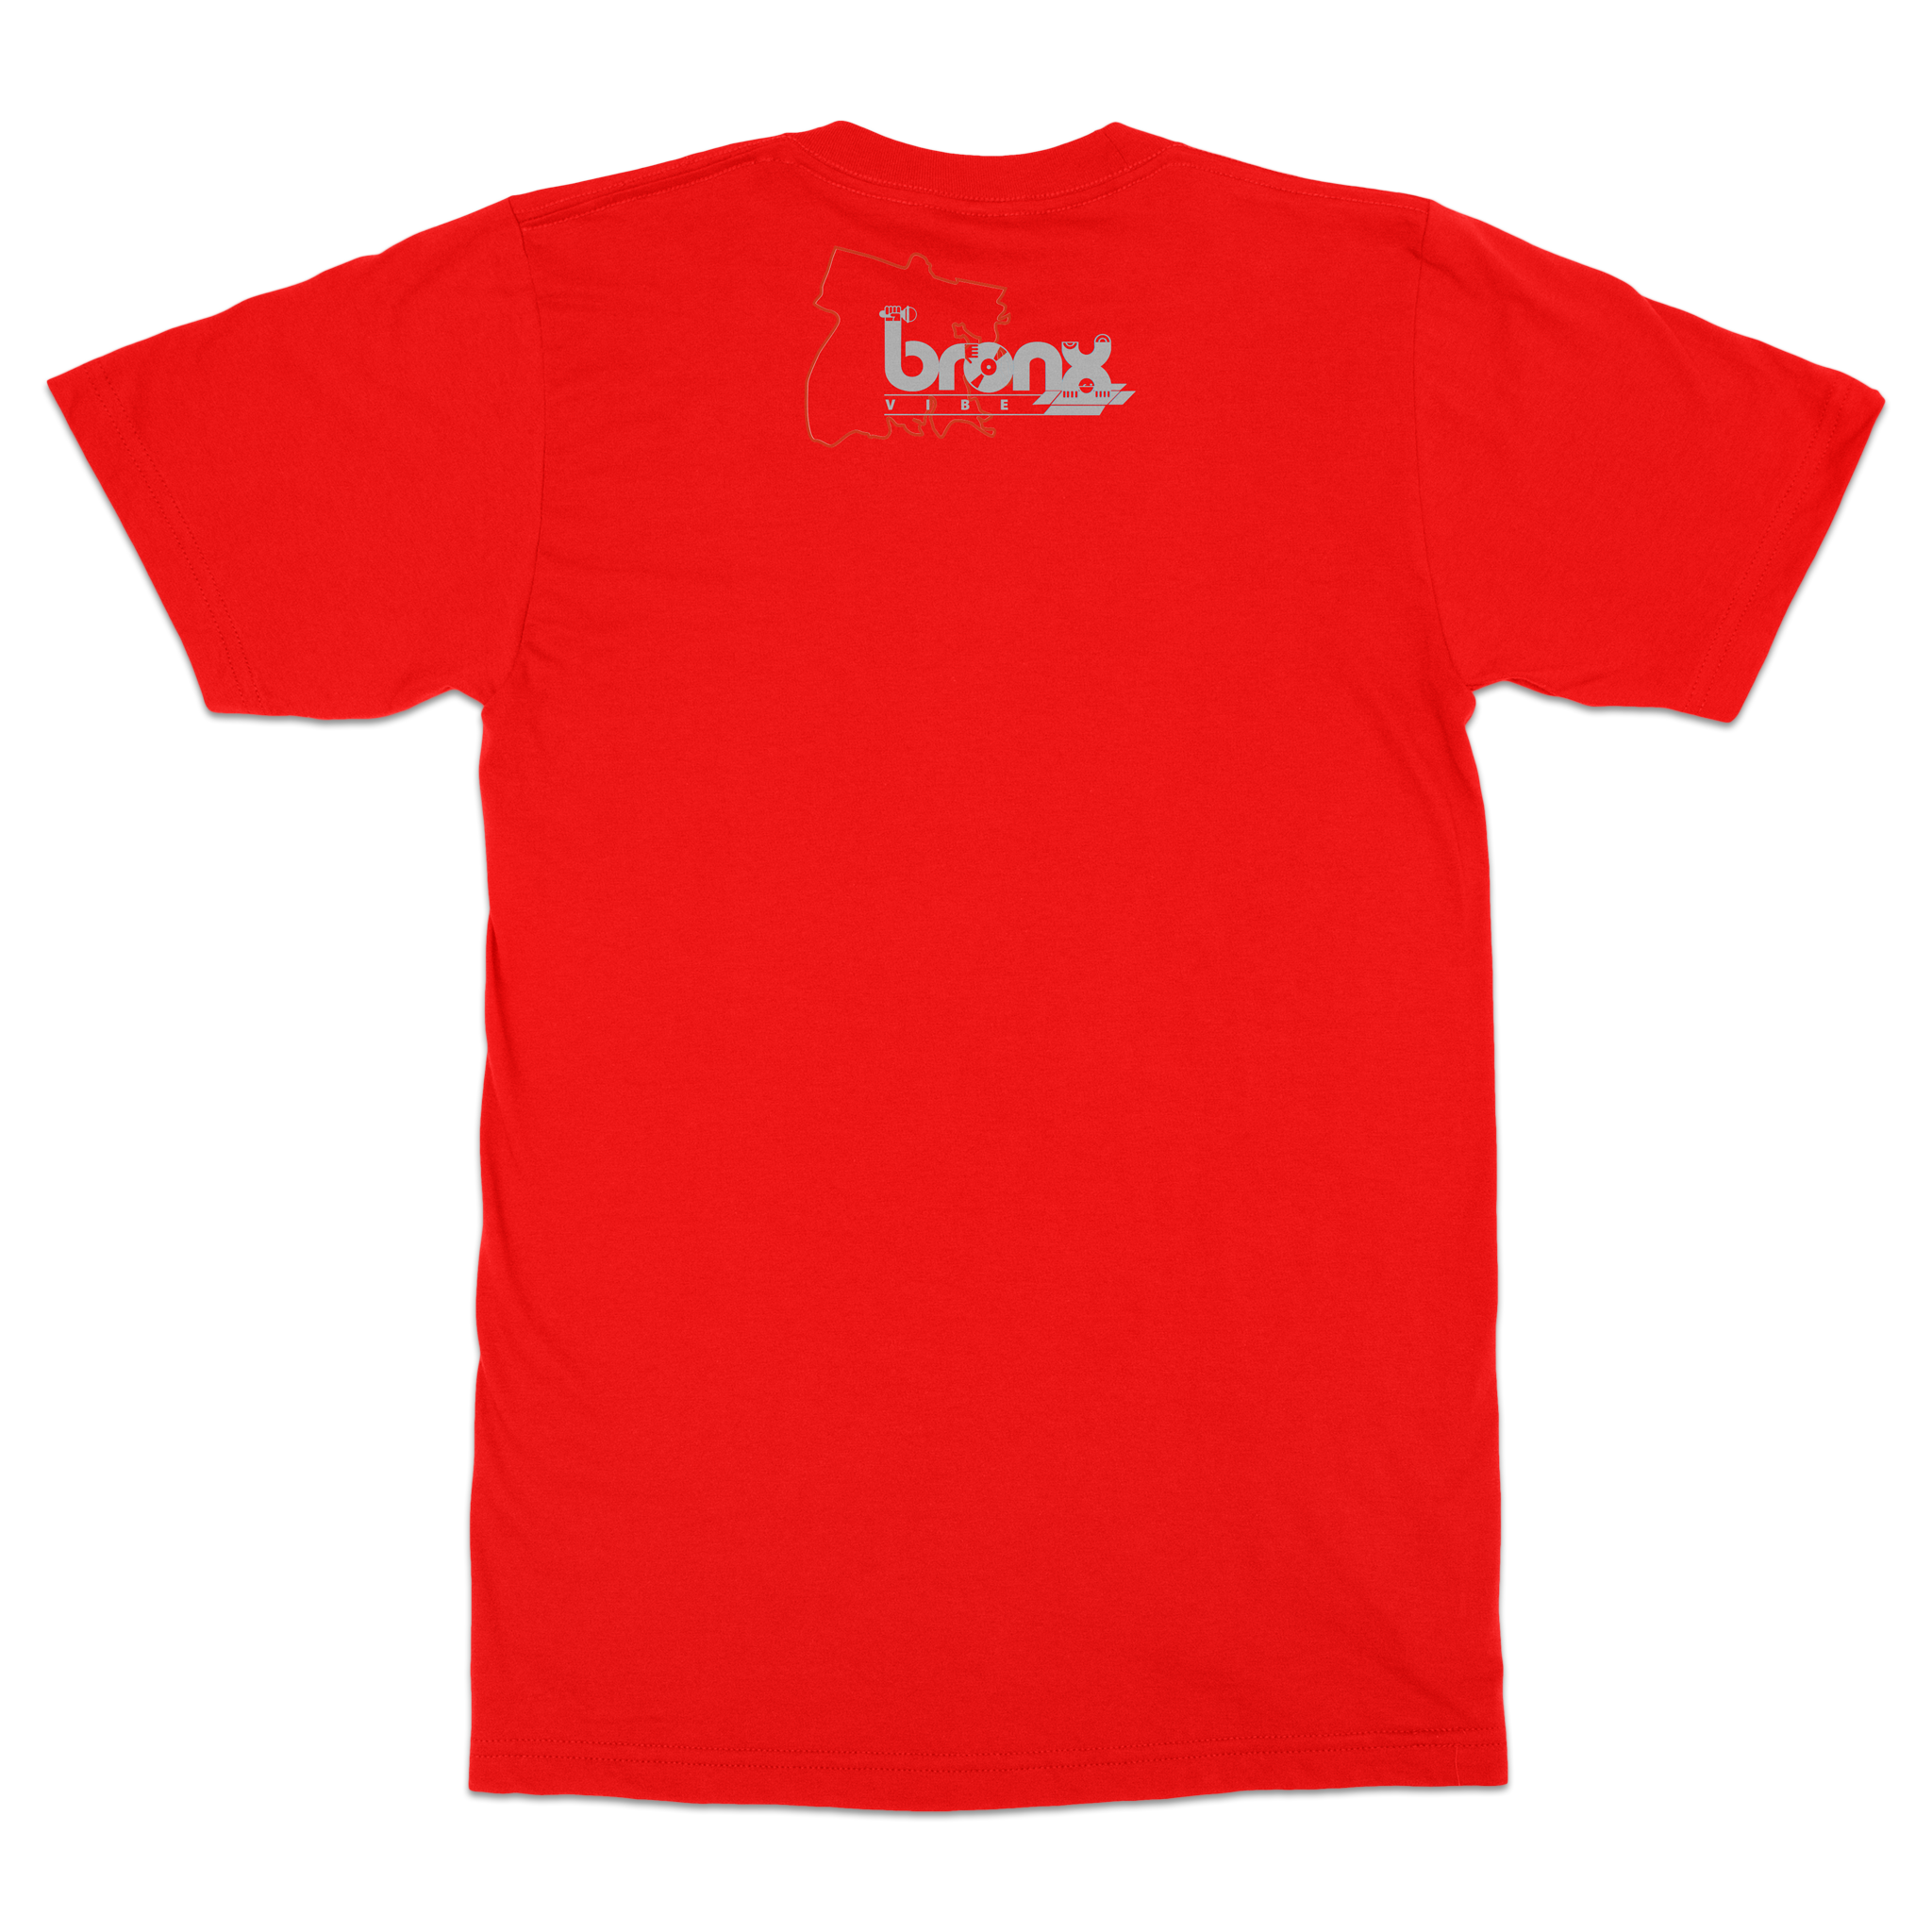 I AM THE BRONX T-Shirt Back in Red